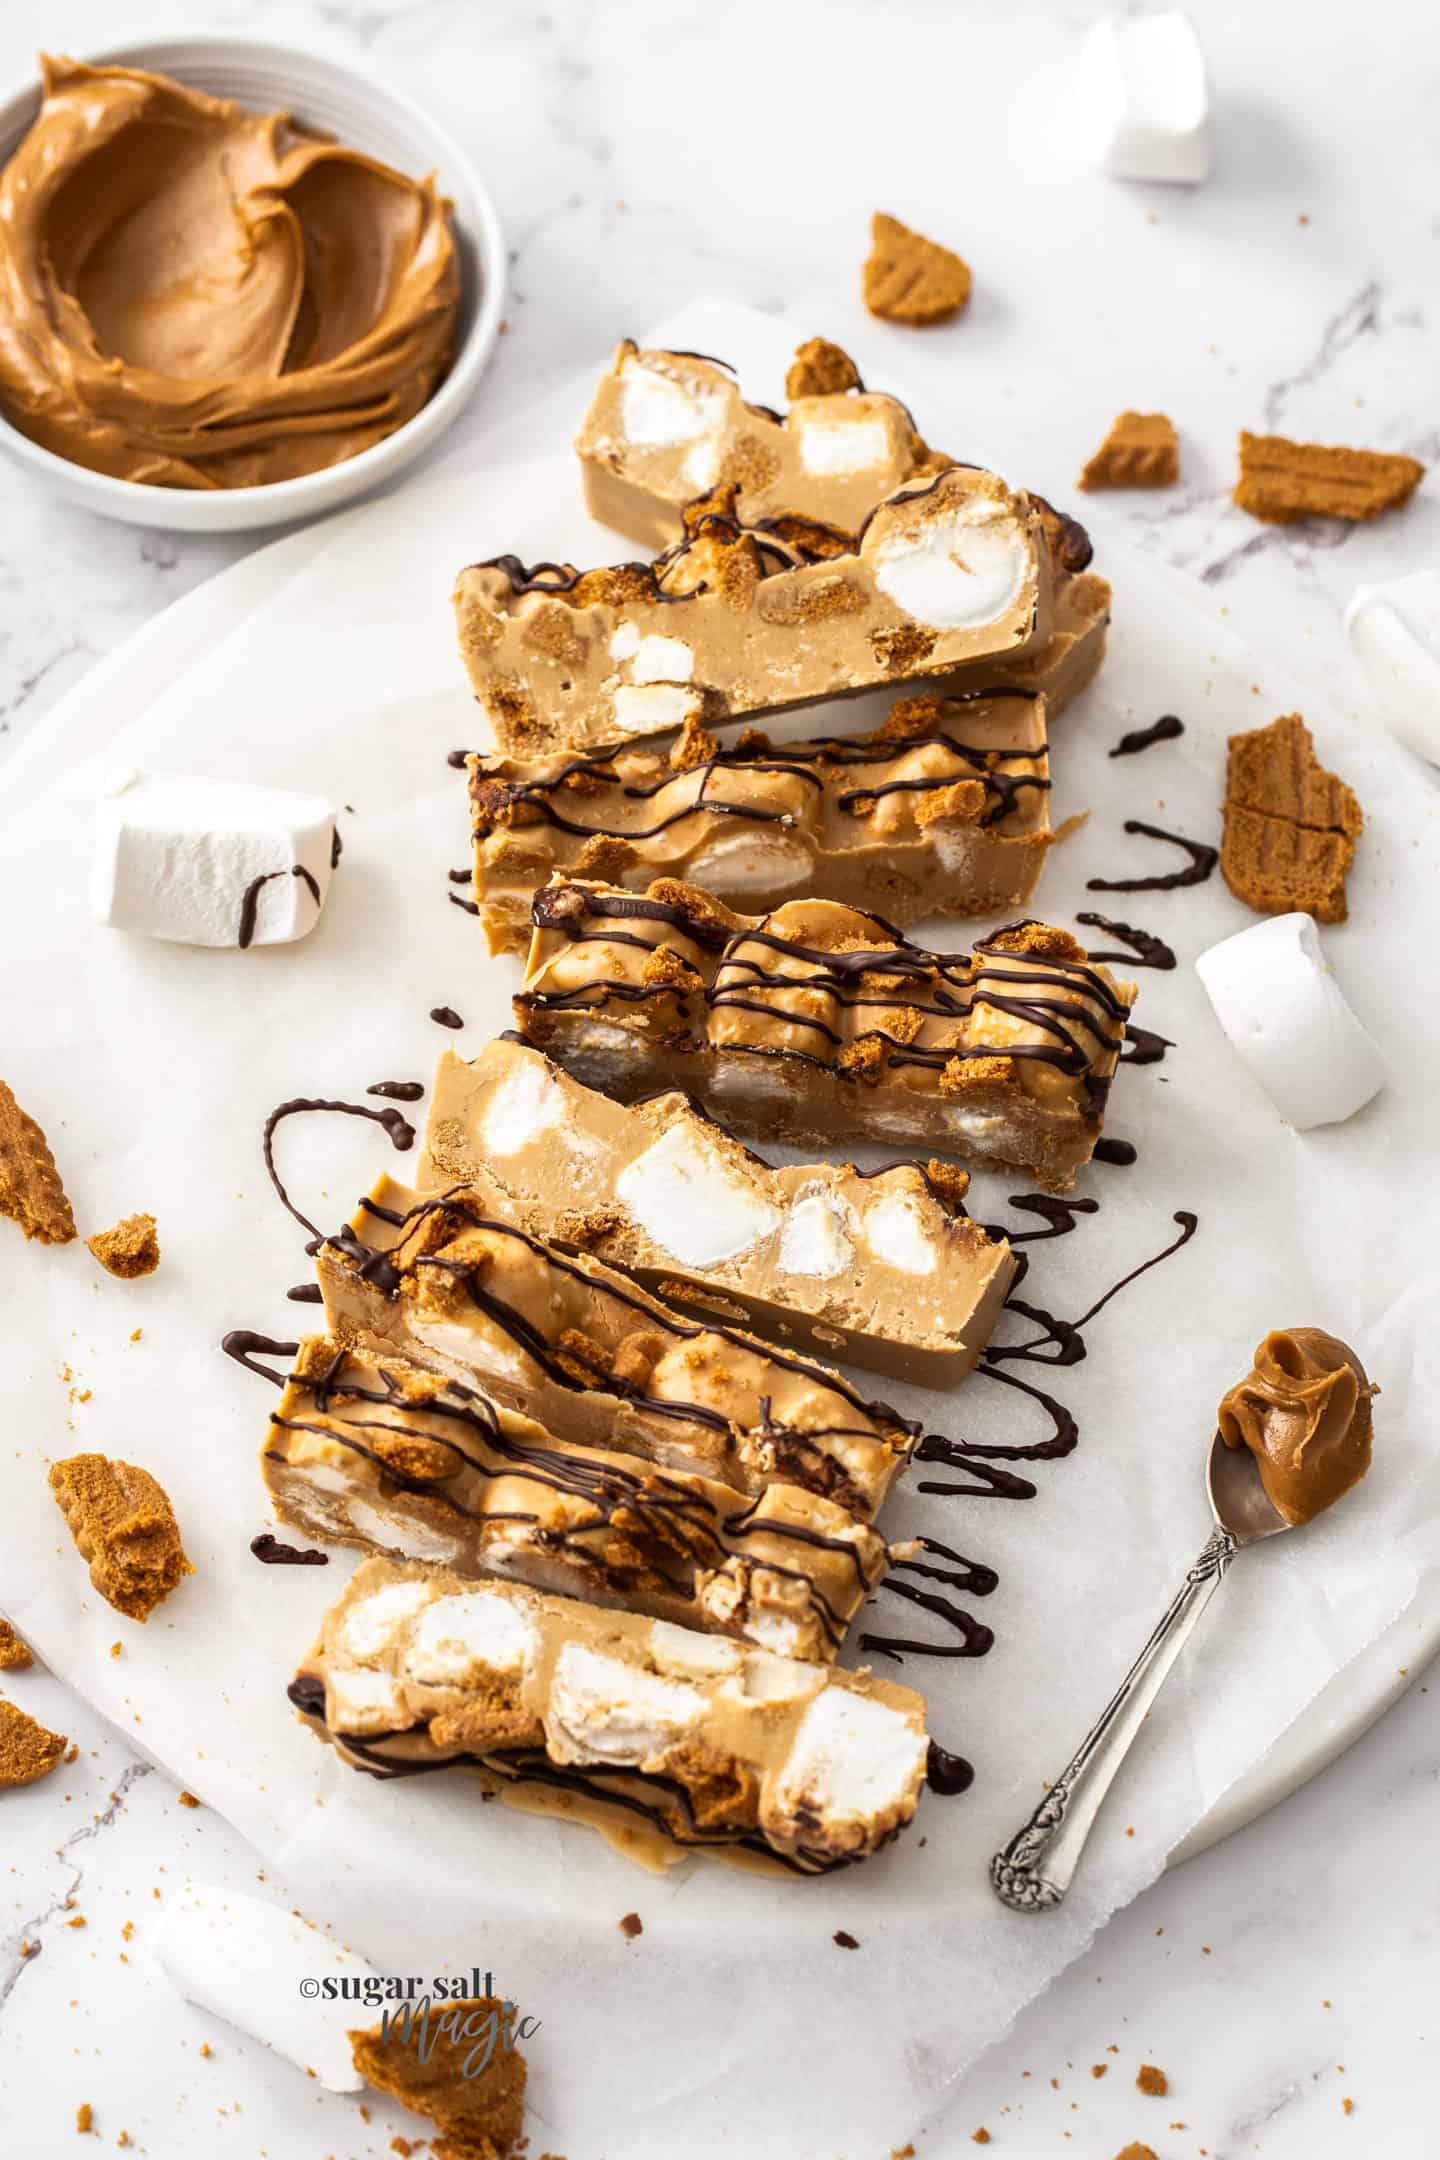 Many slices of biscoff rocky road on a sheet of baking paper.